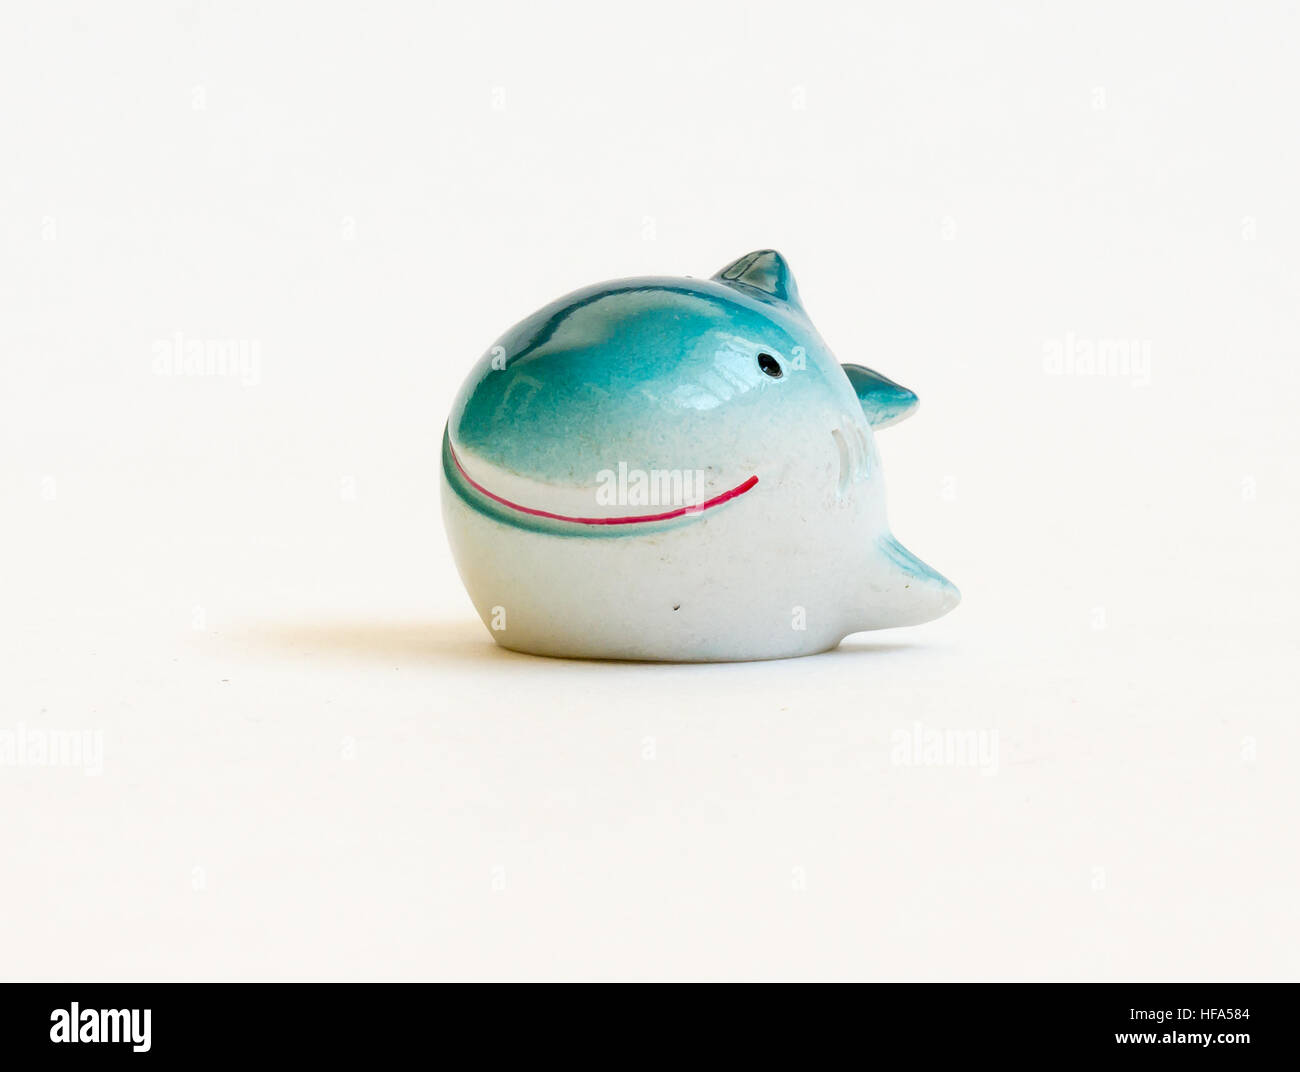 The Miniature isolated toy whale. Stock Photo